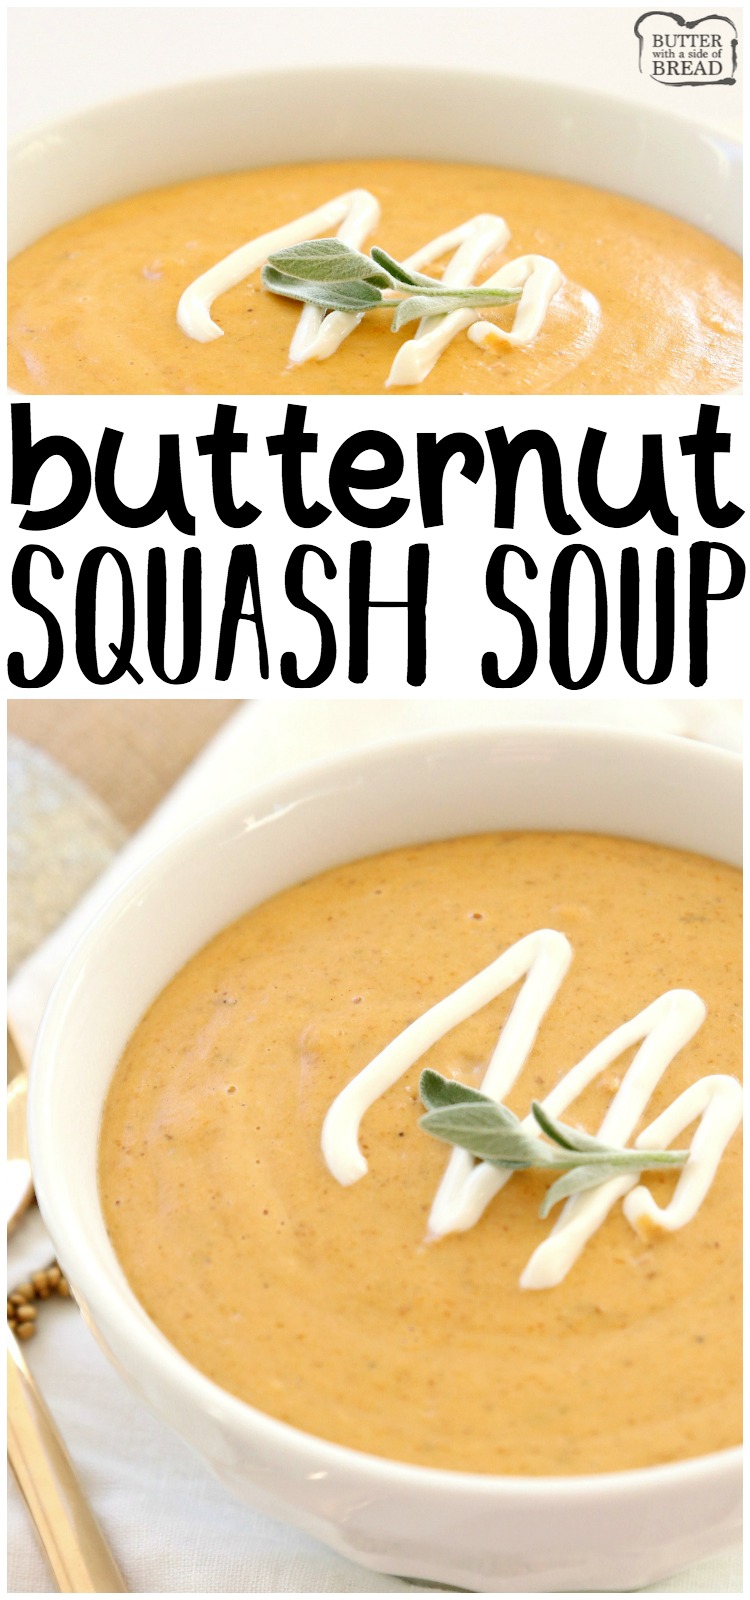 Roasted Butternut Squash Soup made easy in 30 minutes! Creamy, flavorful and healthy butternut squash soup recipe perfect for healthy dinners and lunches. #butternut #soup #recipe #healthy #food #dinner #lunch #meatless #lowcal #recipe from BUTTER WITH A SIDE OF BREAD